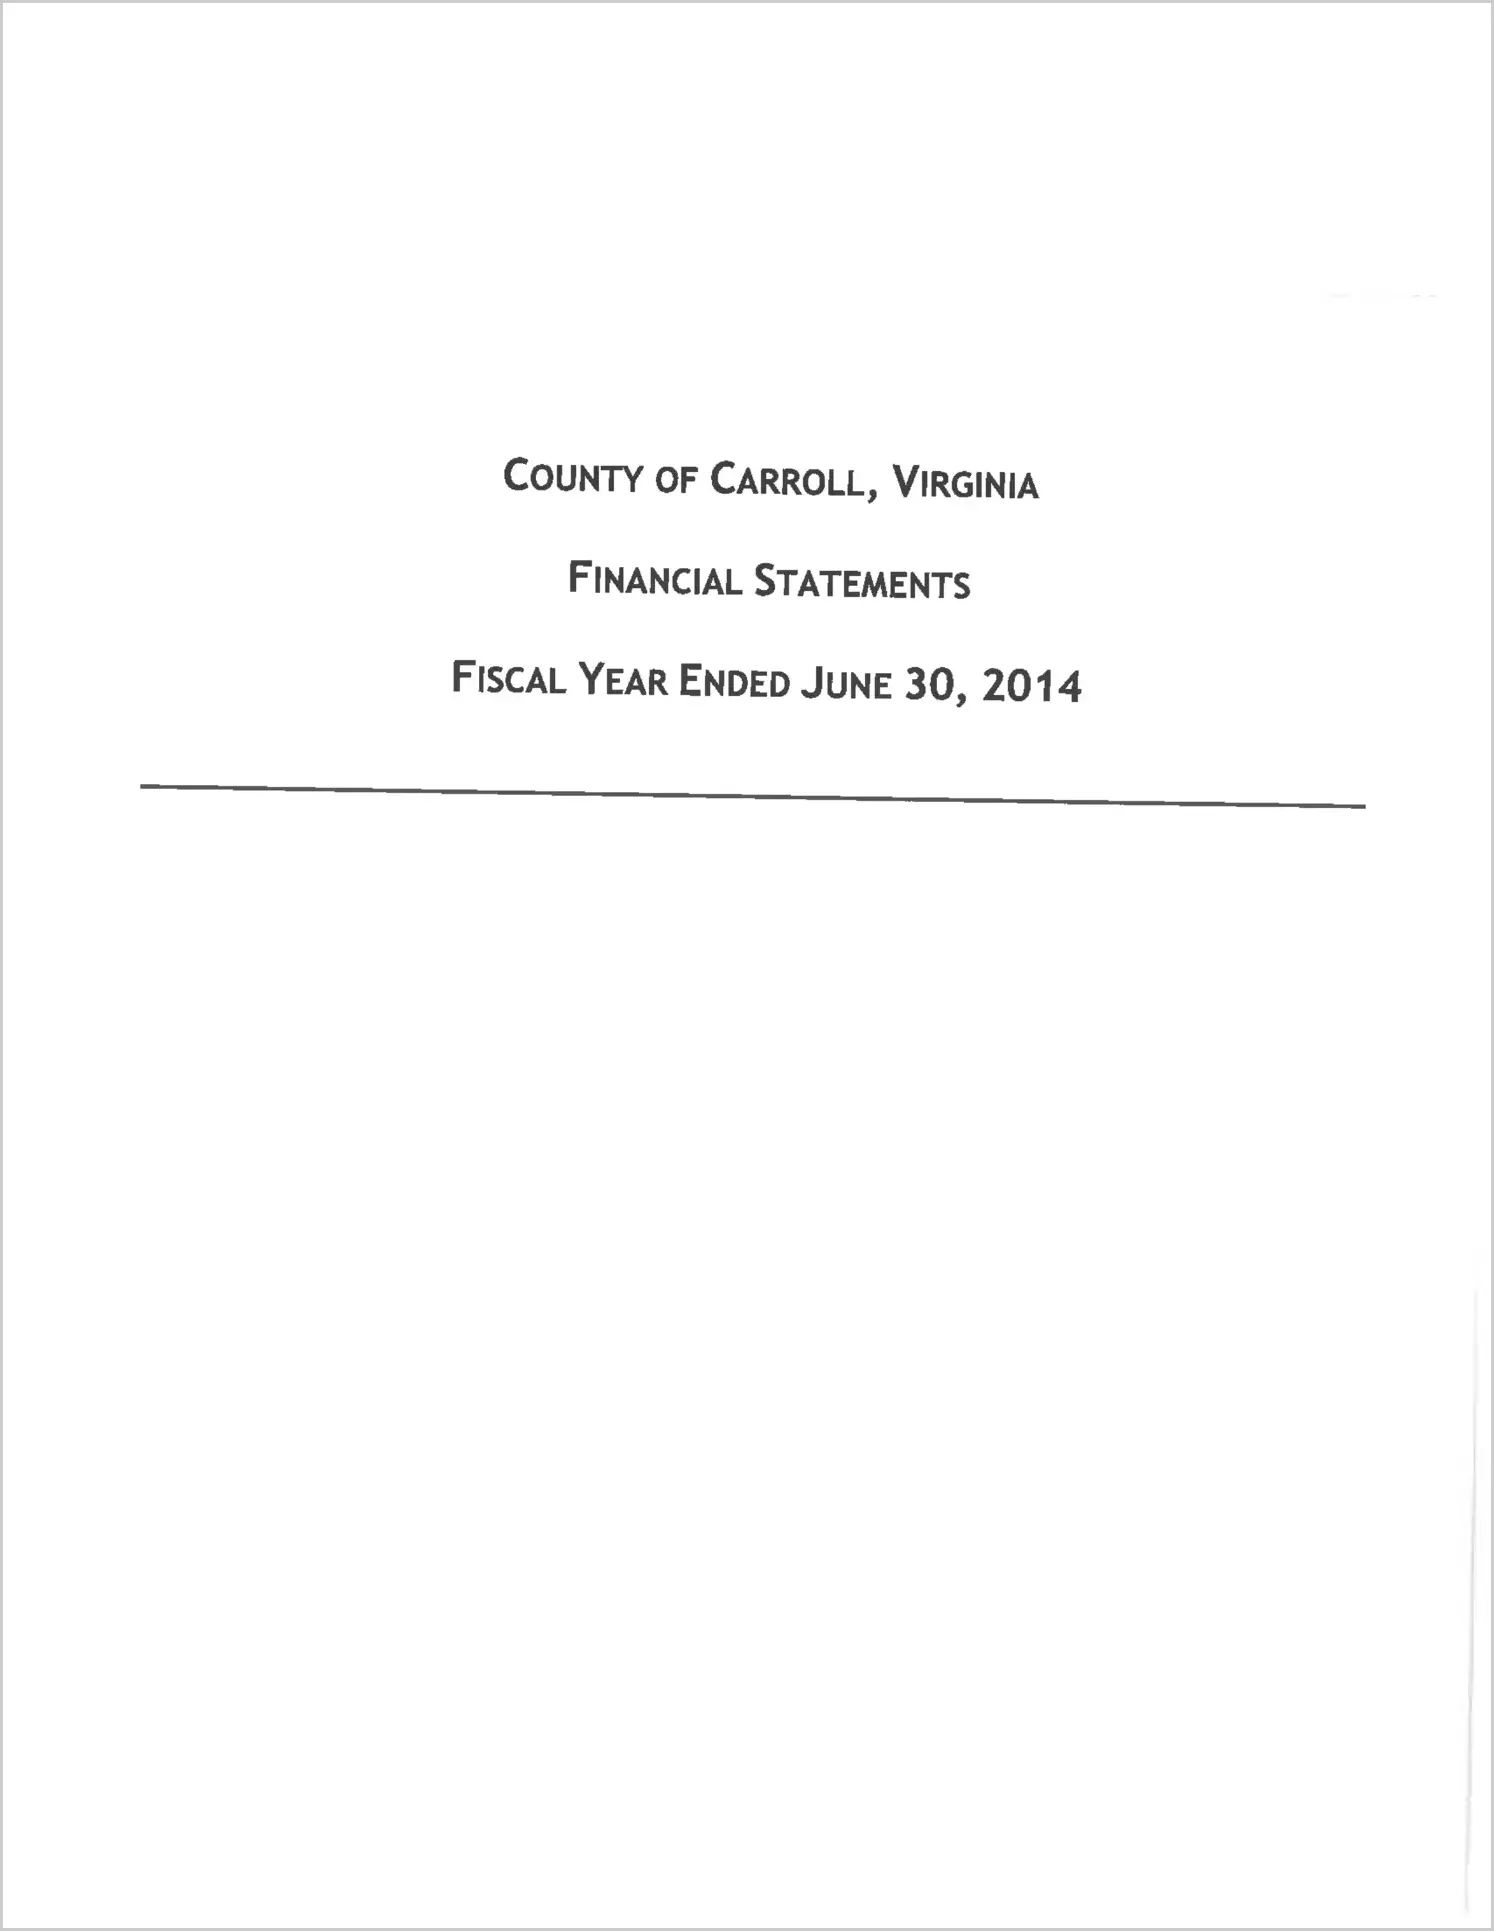 2014 Annual Financial Report for County of Carroll